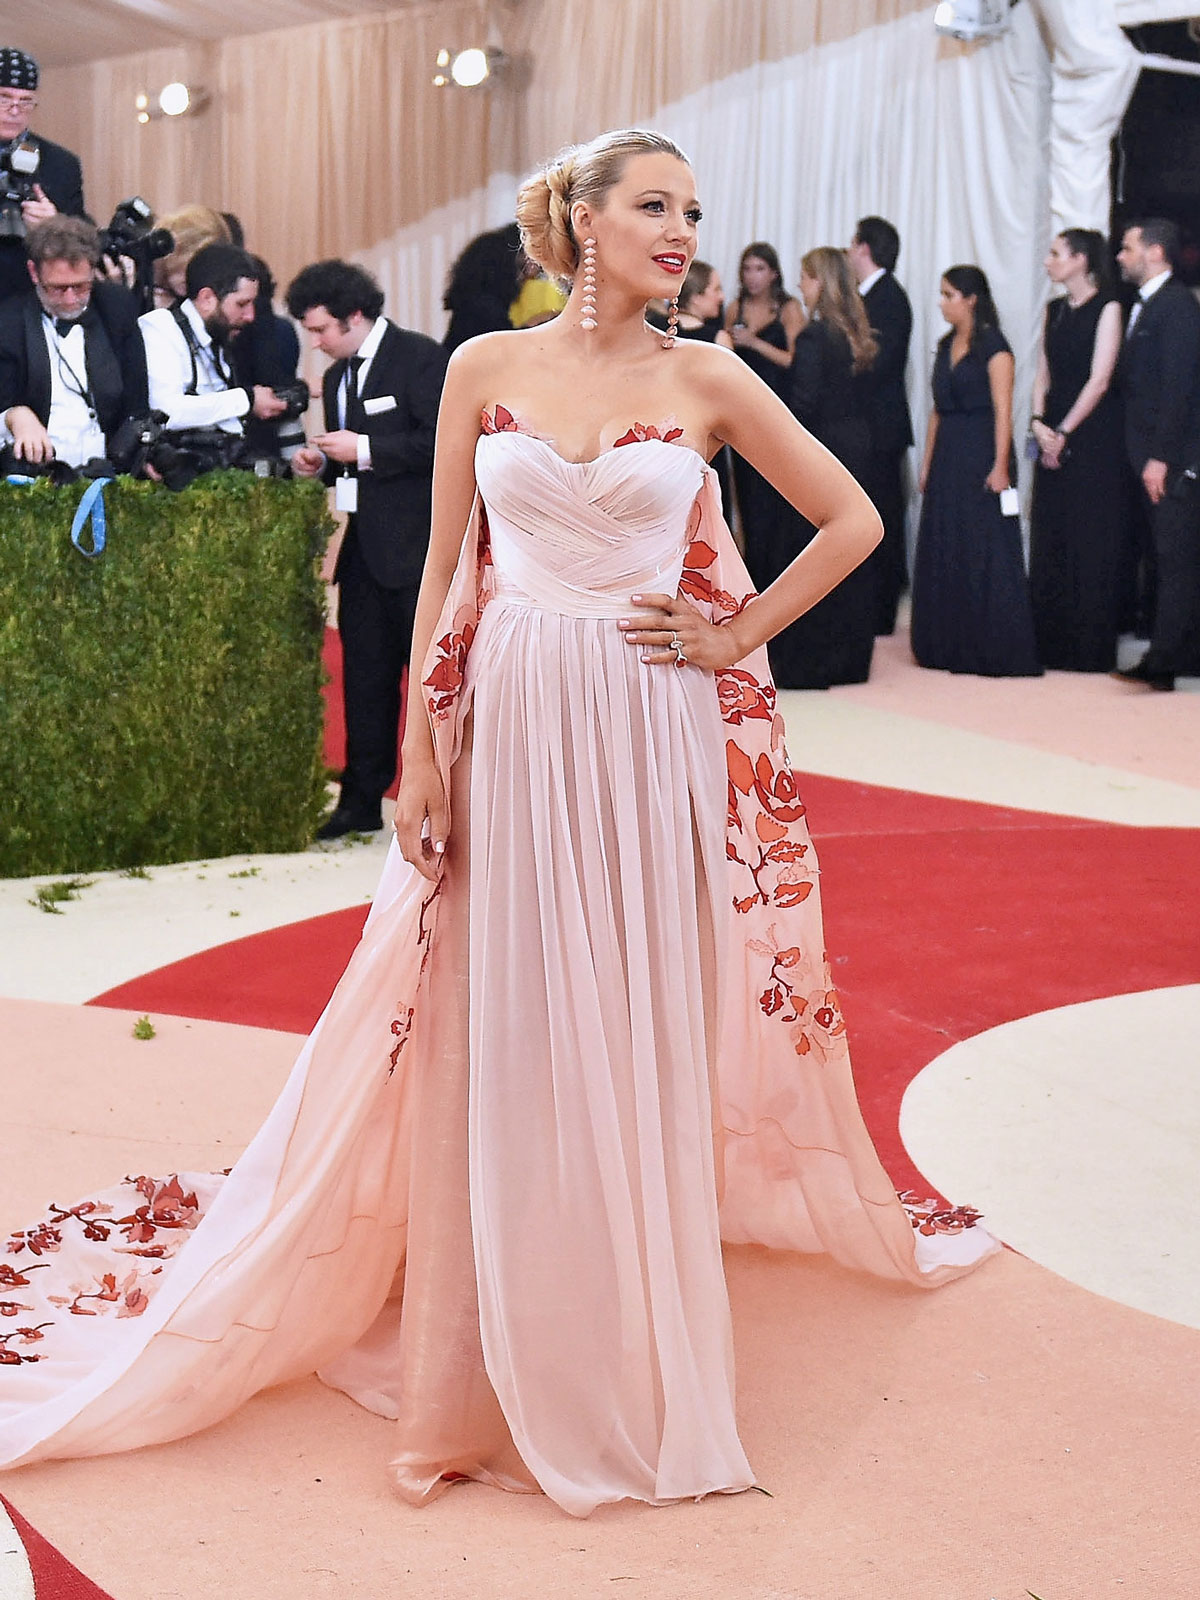 Blake Lively wears a strapless pink gown with a train.